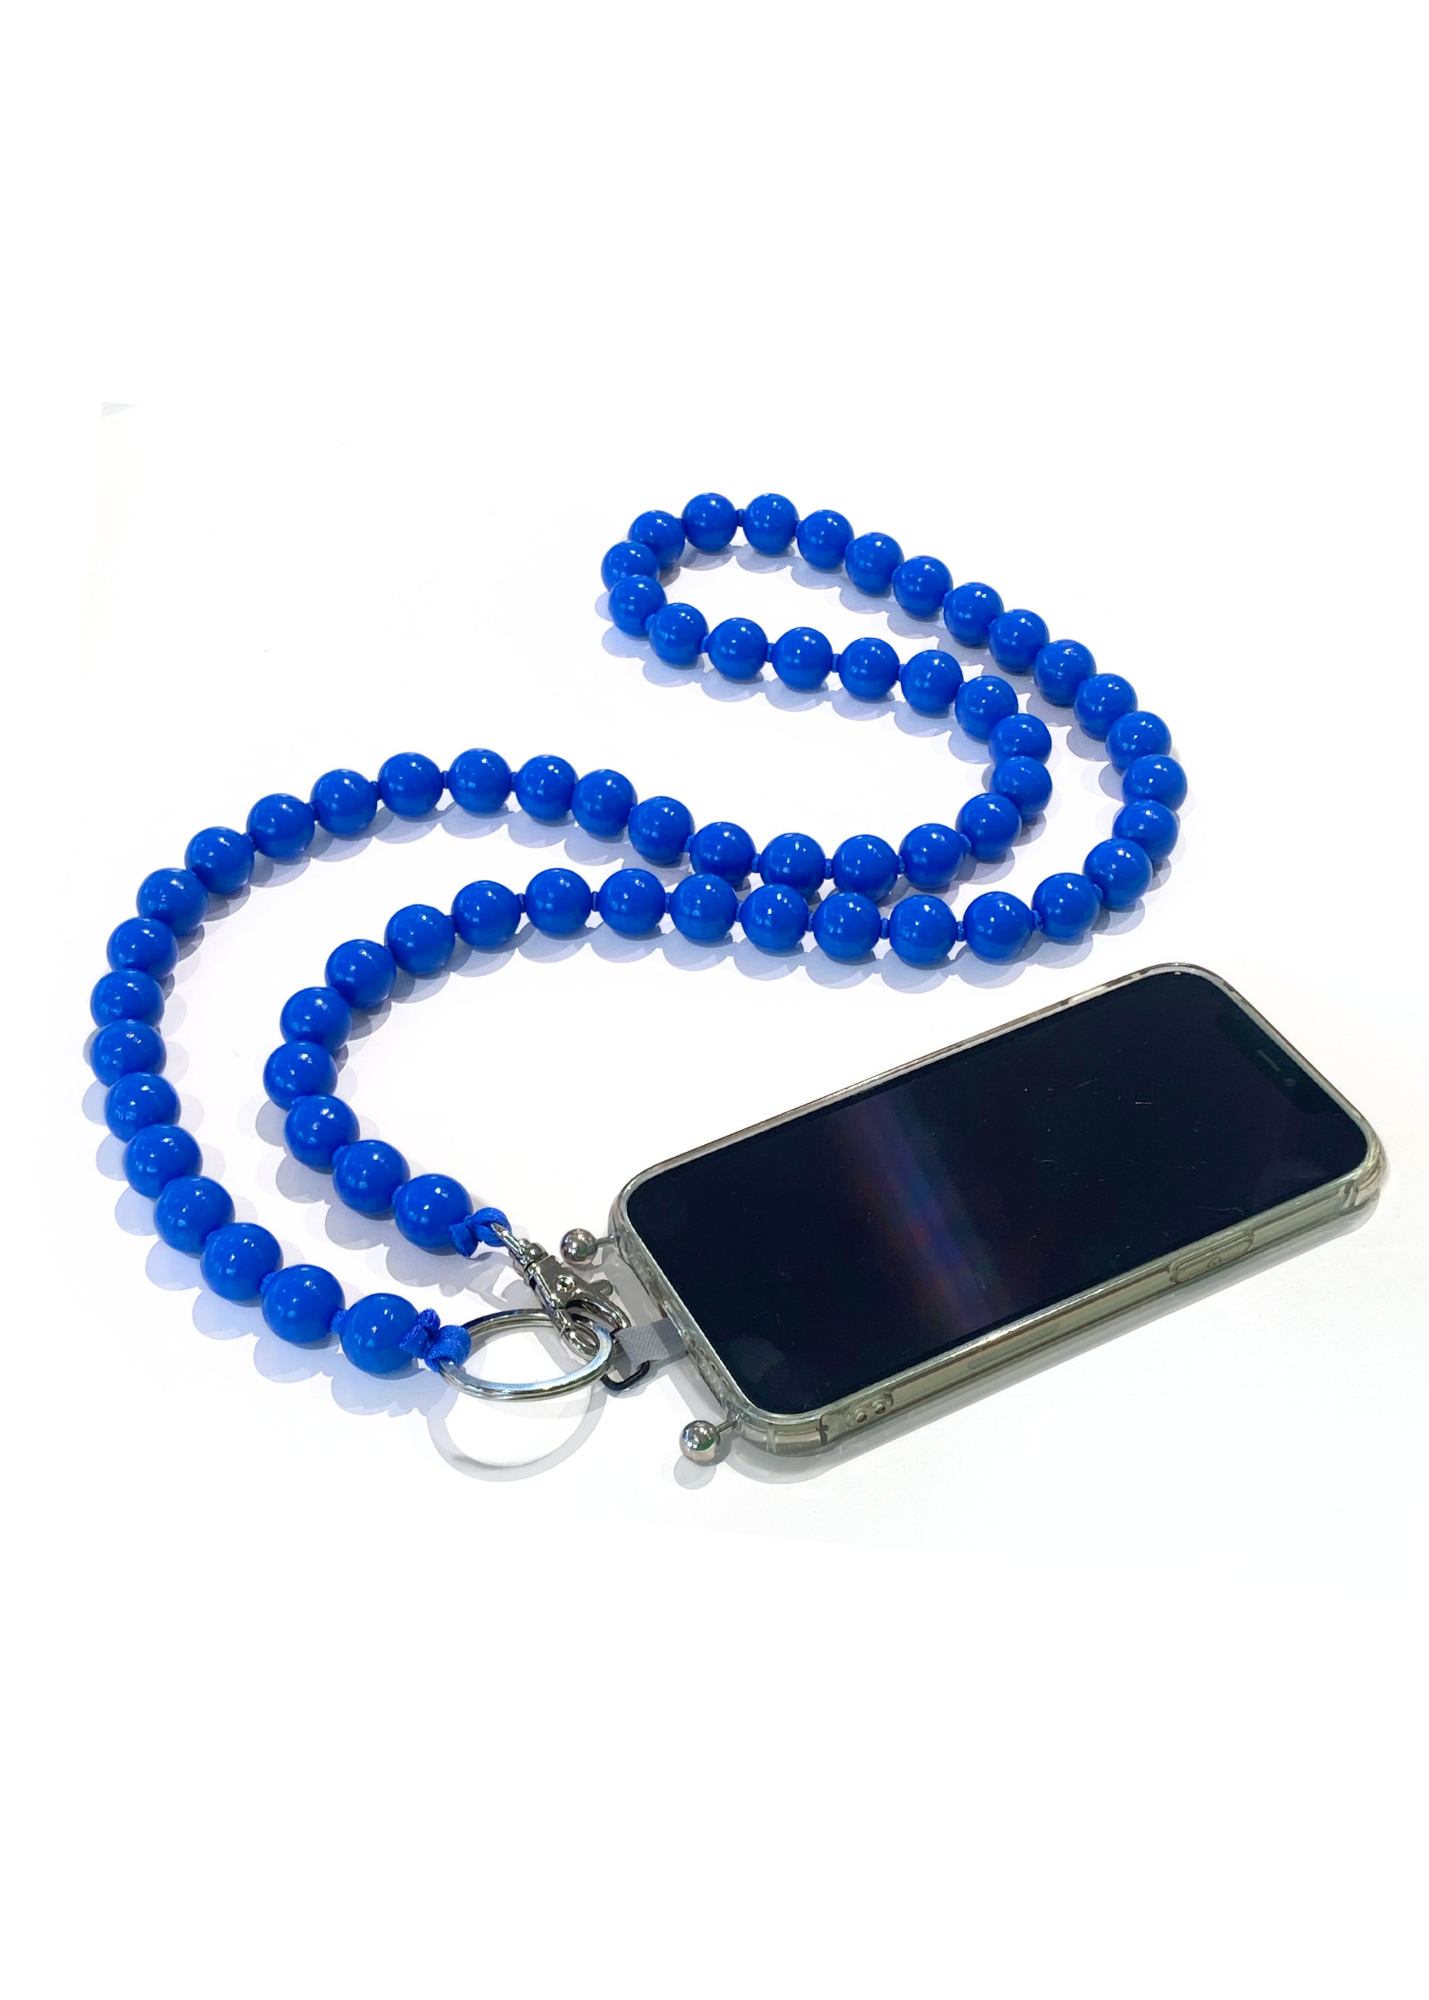 INA SEIFART BIG BEADED PHONE NECKLACE AND ADAPTER